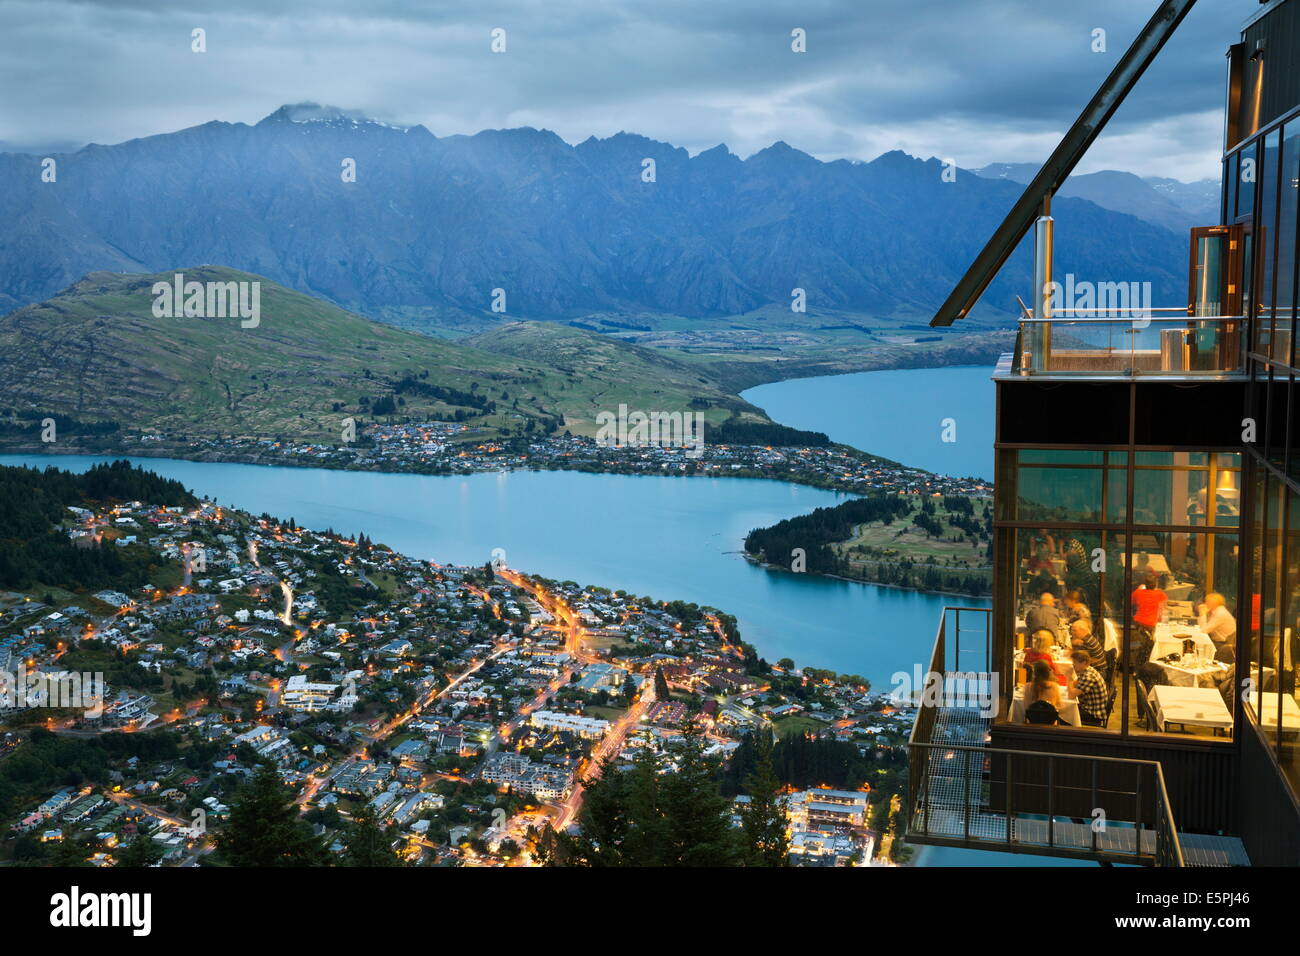 Skyline Restaurant with Lake Wakatipu and the Remarkables at dusk, Queenstown, Otago, South Island, New Zealand, Pacific Stock Photo